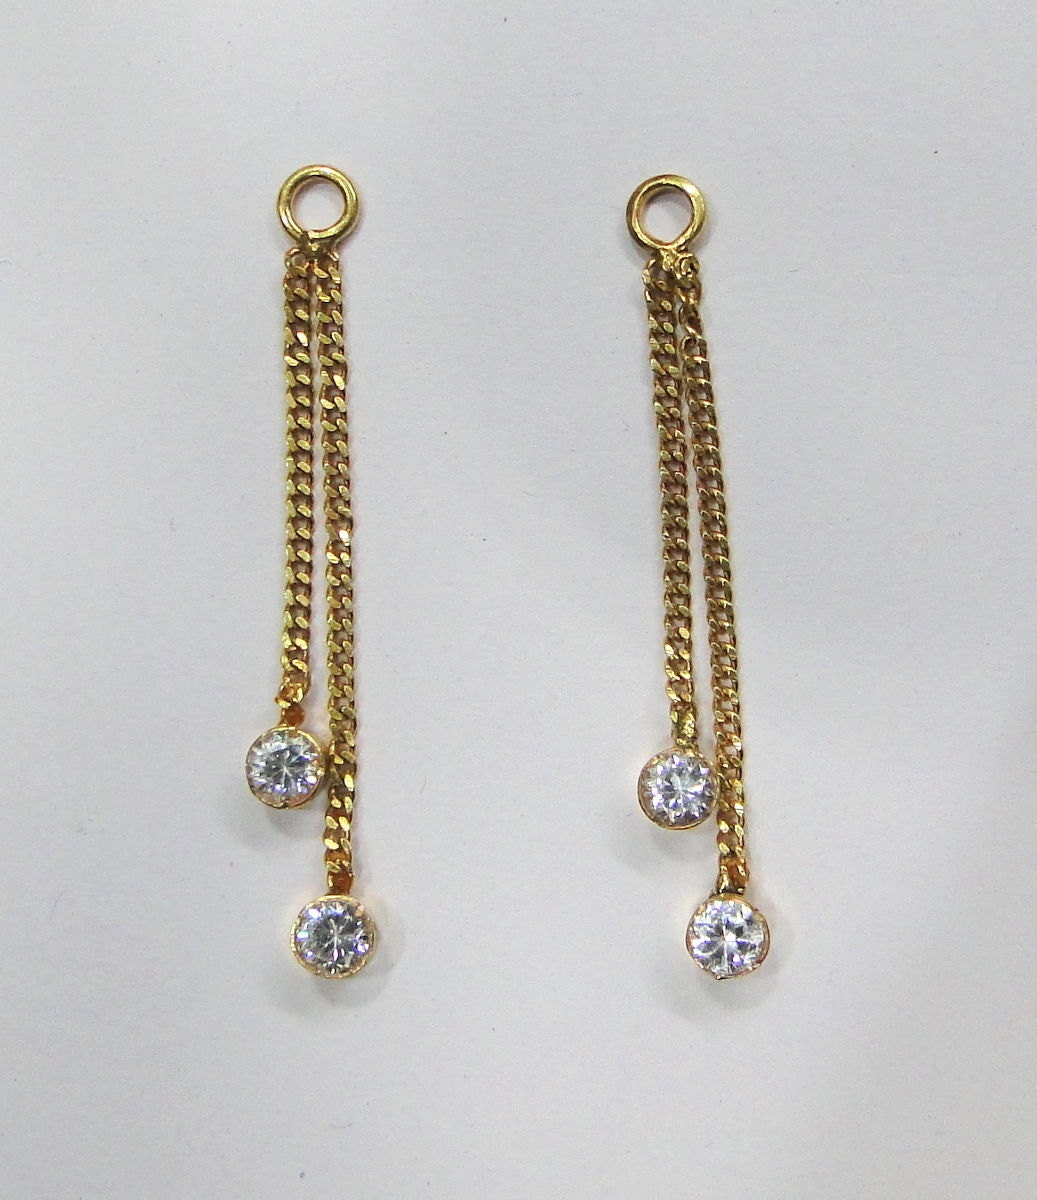 Buy Malabar Gold and Diamonds 22k Yellow Gold Earrings for Women Online At  Best Price @ Tata CLiQ